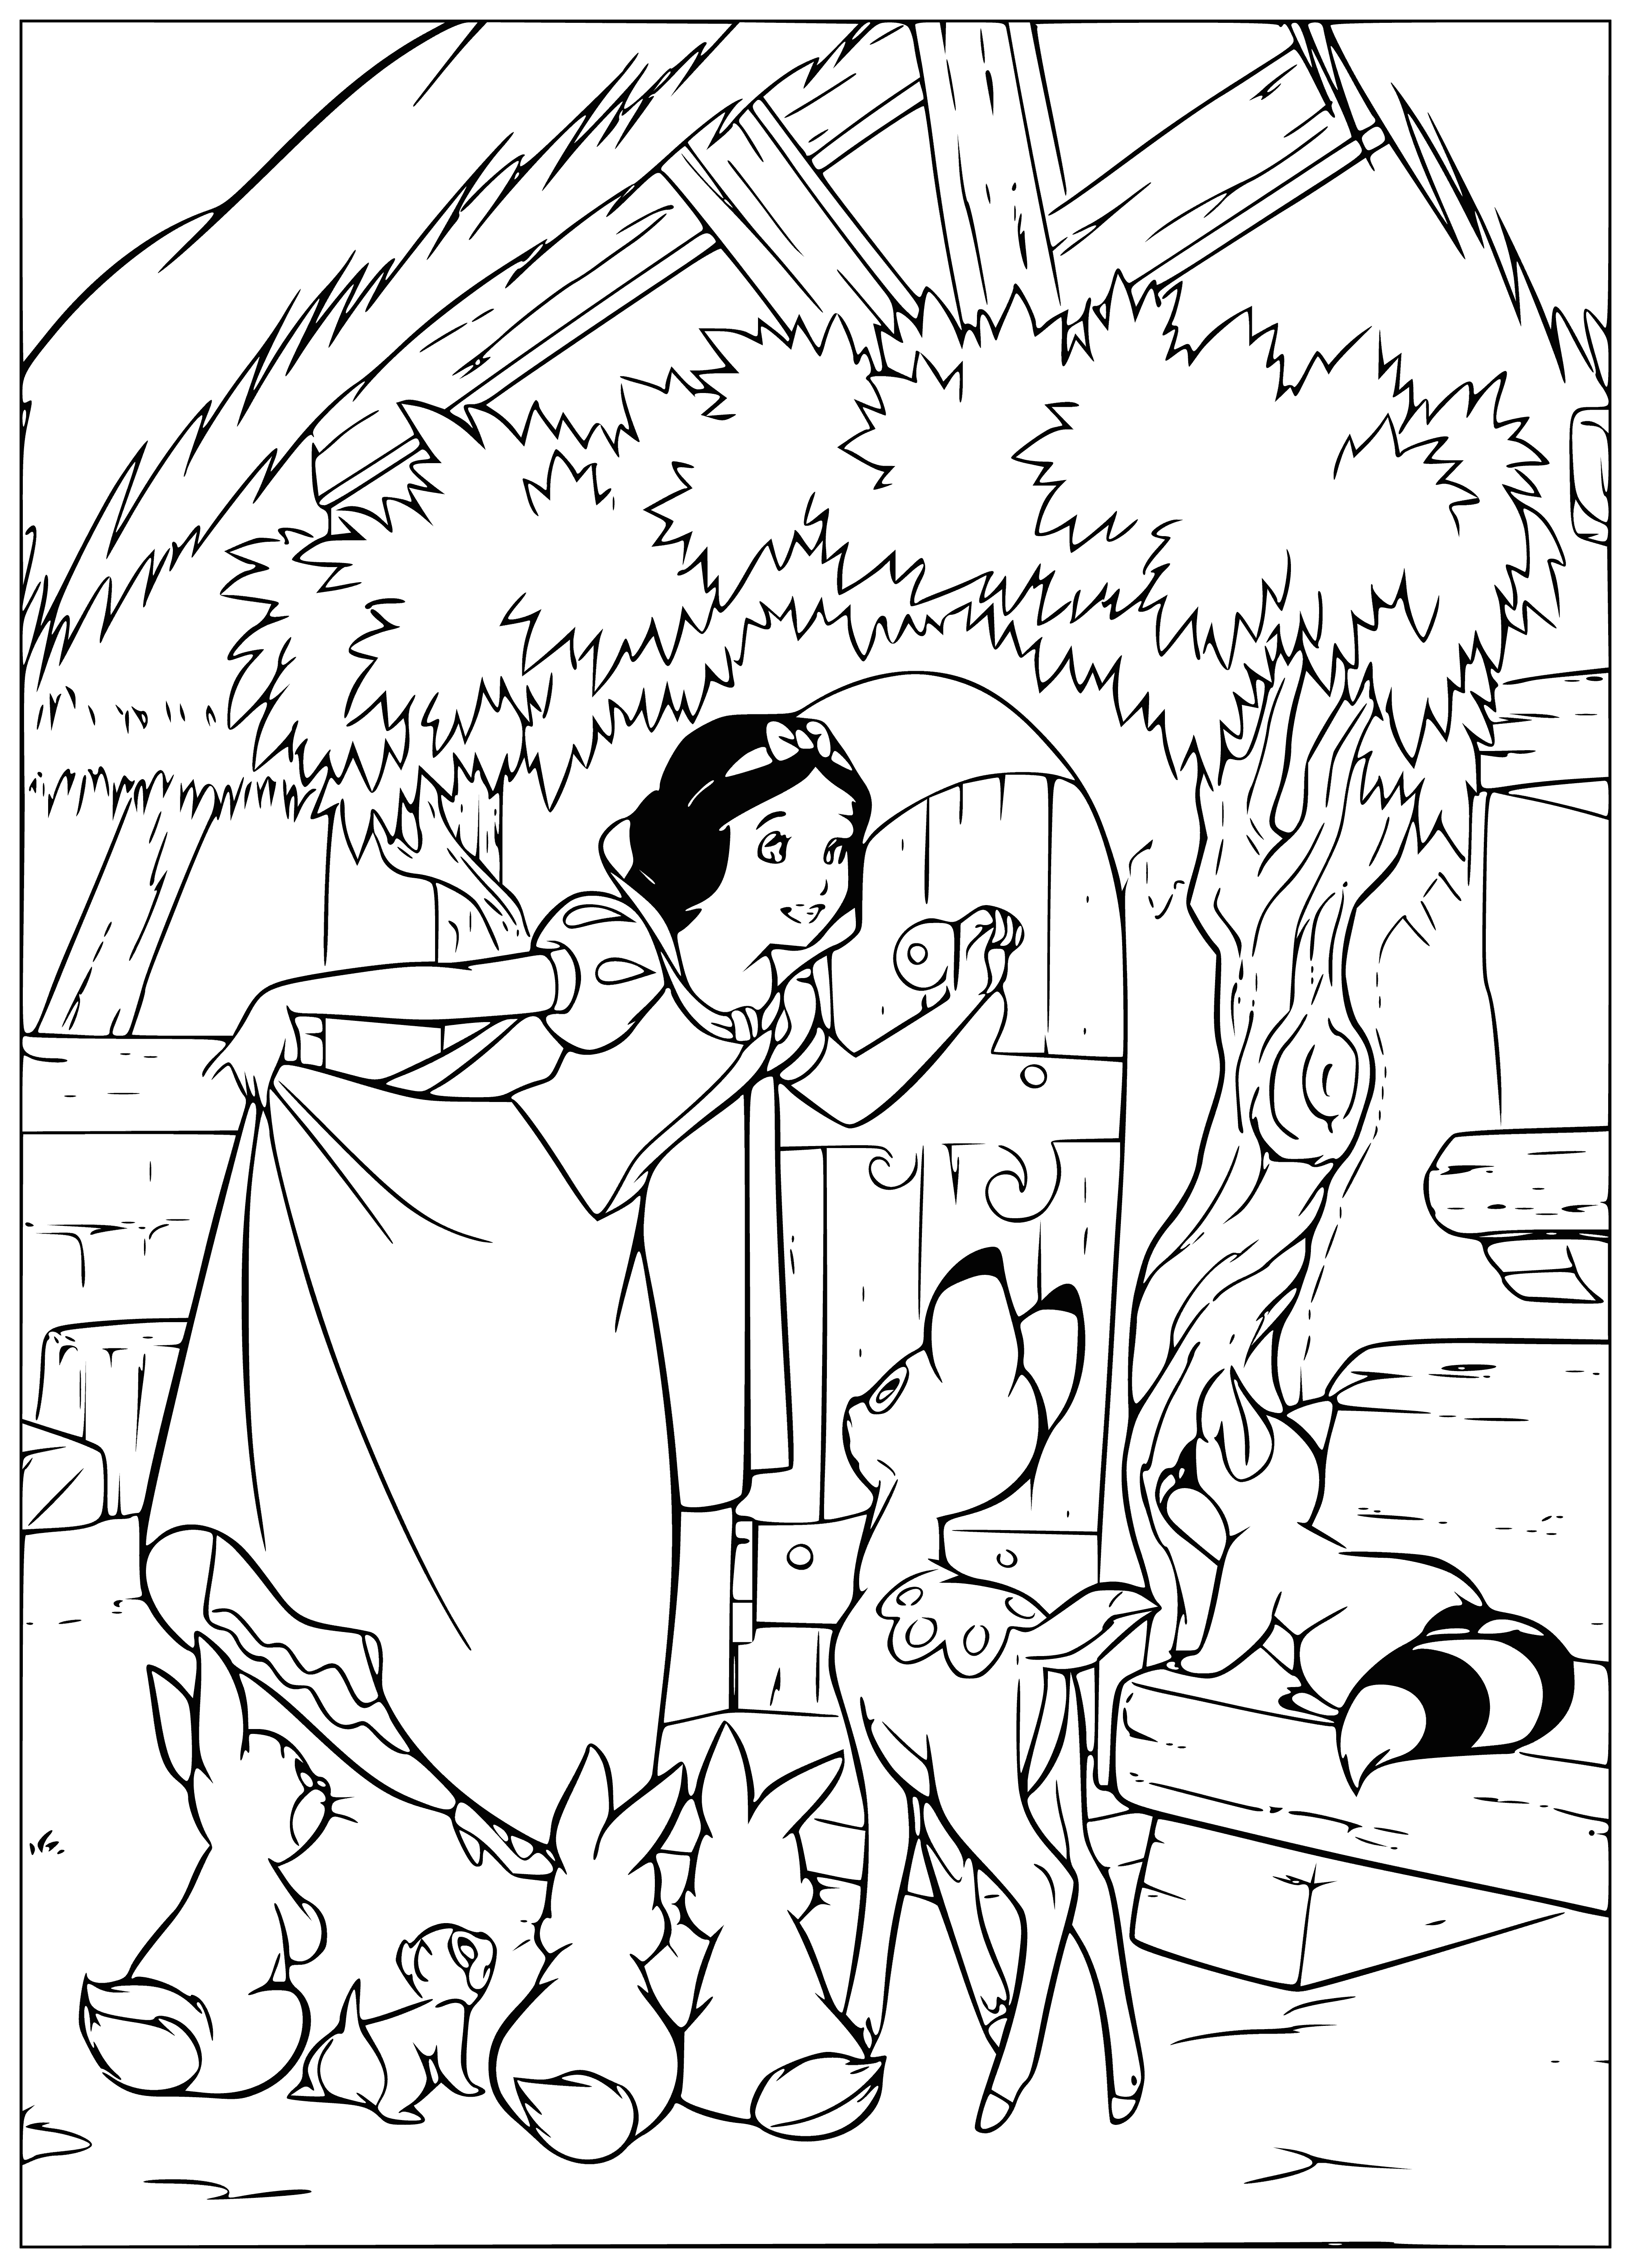 coloring page: Snow White finds a house with 7 beds and decides to take a nap there.